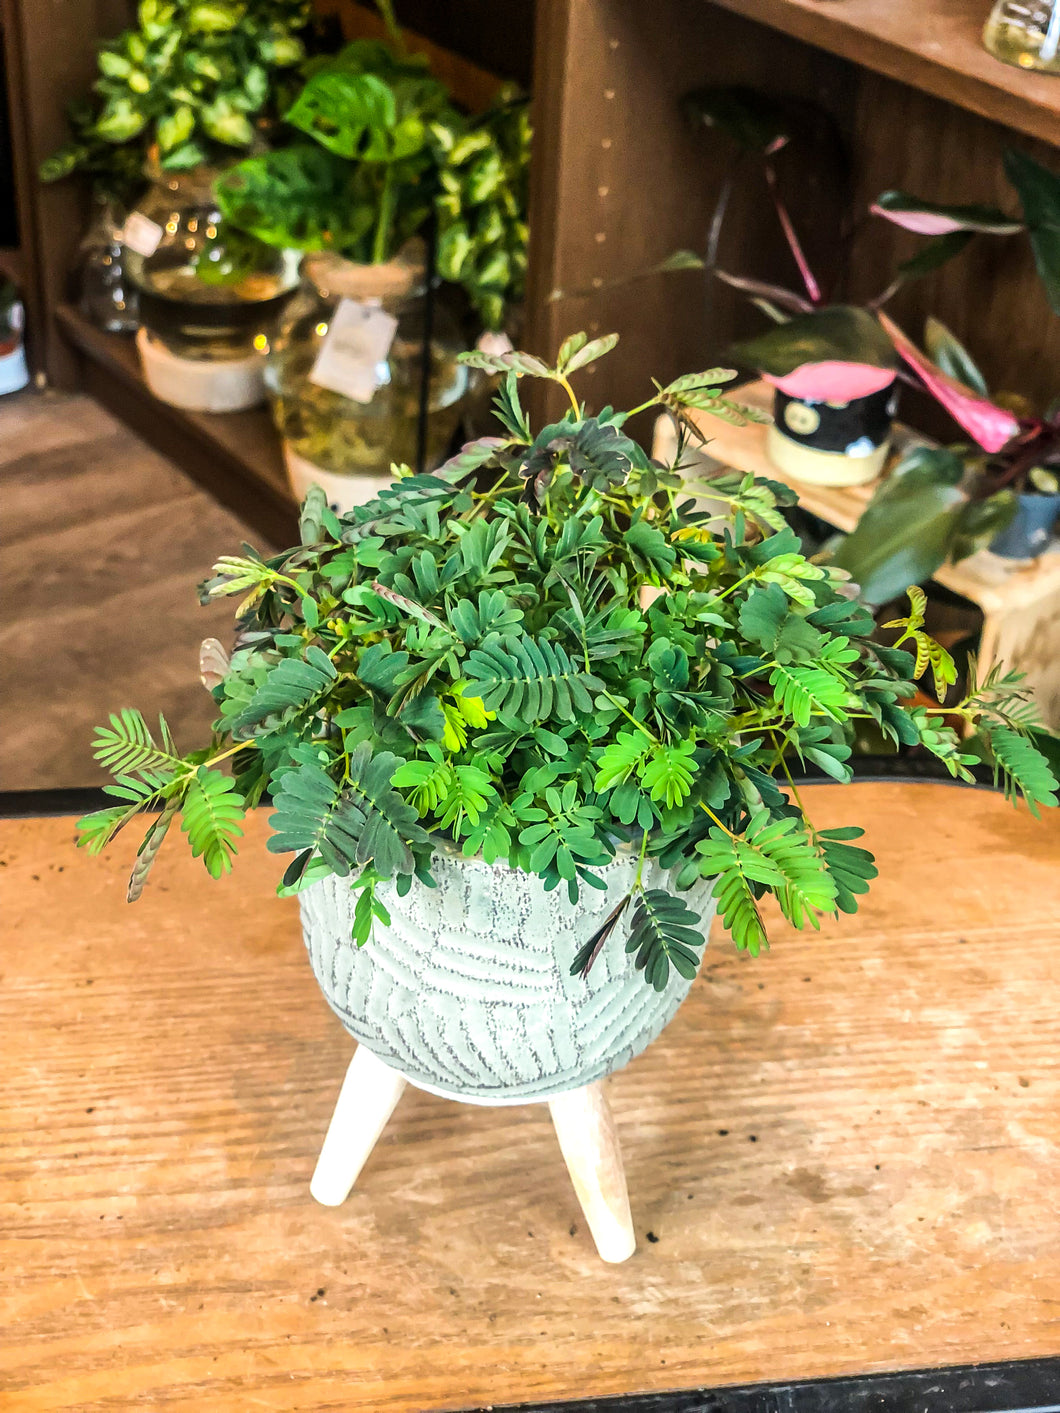 Mimosa Pudica - Avalon - Plants, Gifts & Antiques